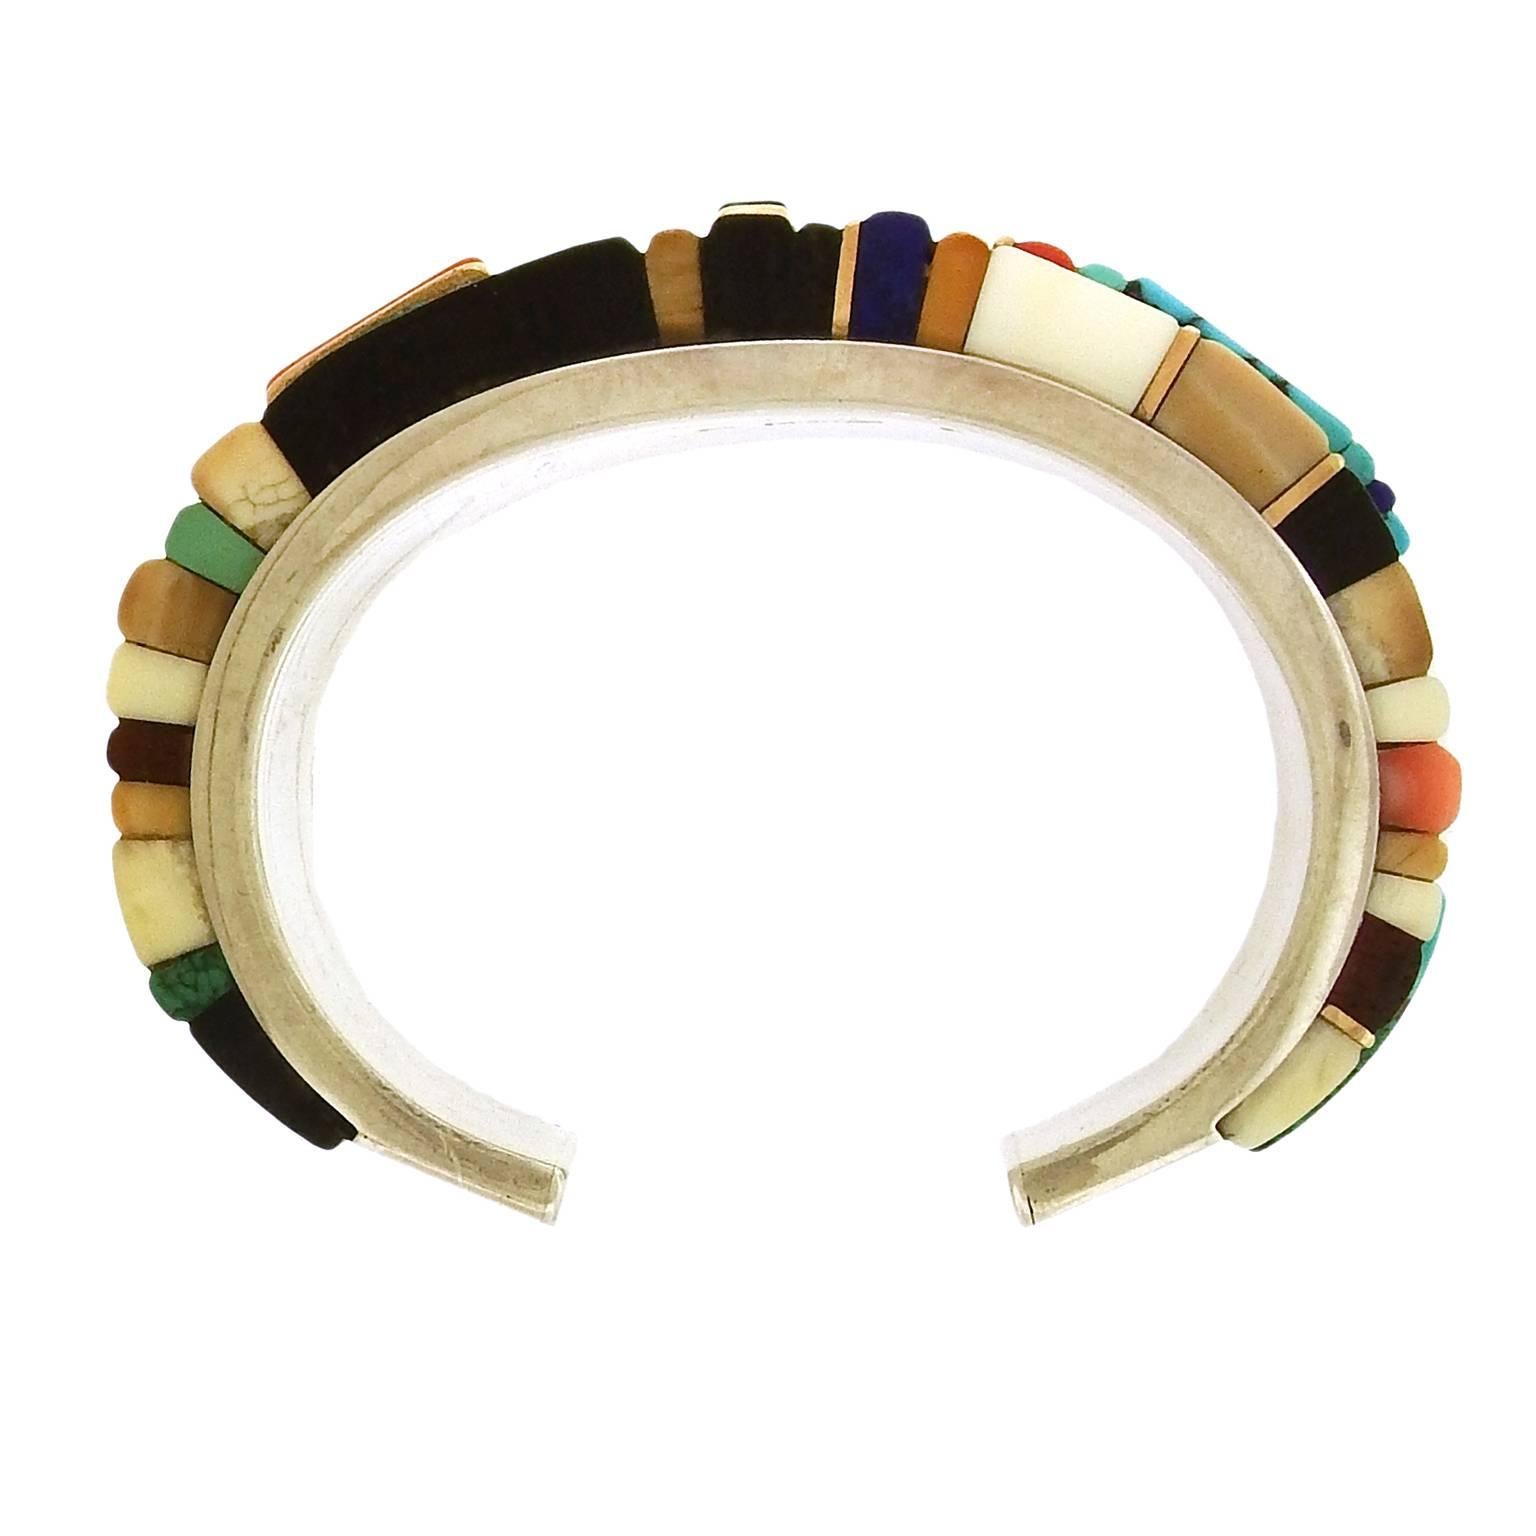 Verma Nequatewa, niece of Charles Loloma, creates one-of-a-kind gemstone jewels in the Hopi tradition under the name Sonwai. This sterling silver bracelet is channel-set  with hand-cut rectangular cabochons, including lapis lazuli, turquoise, coral,